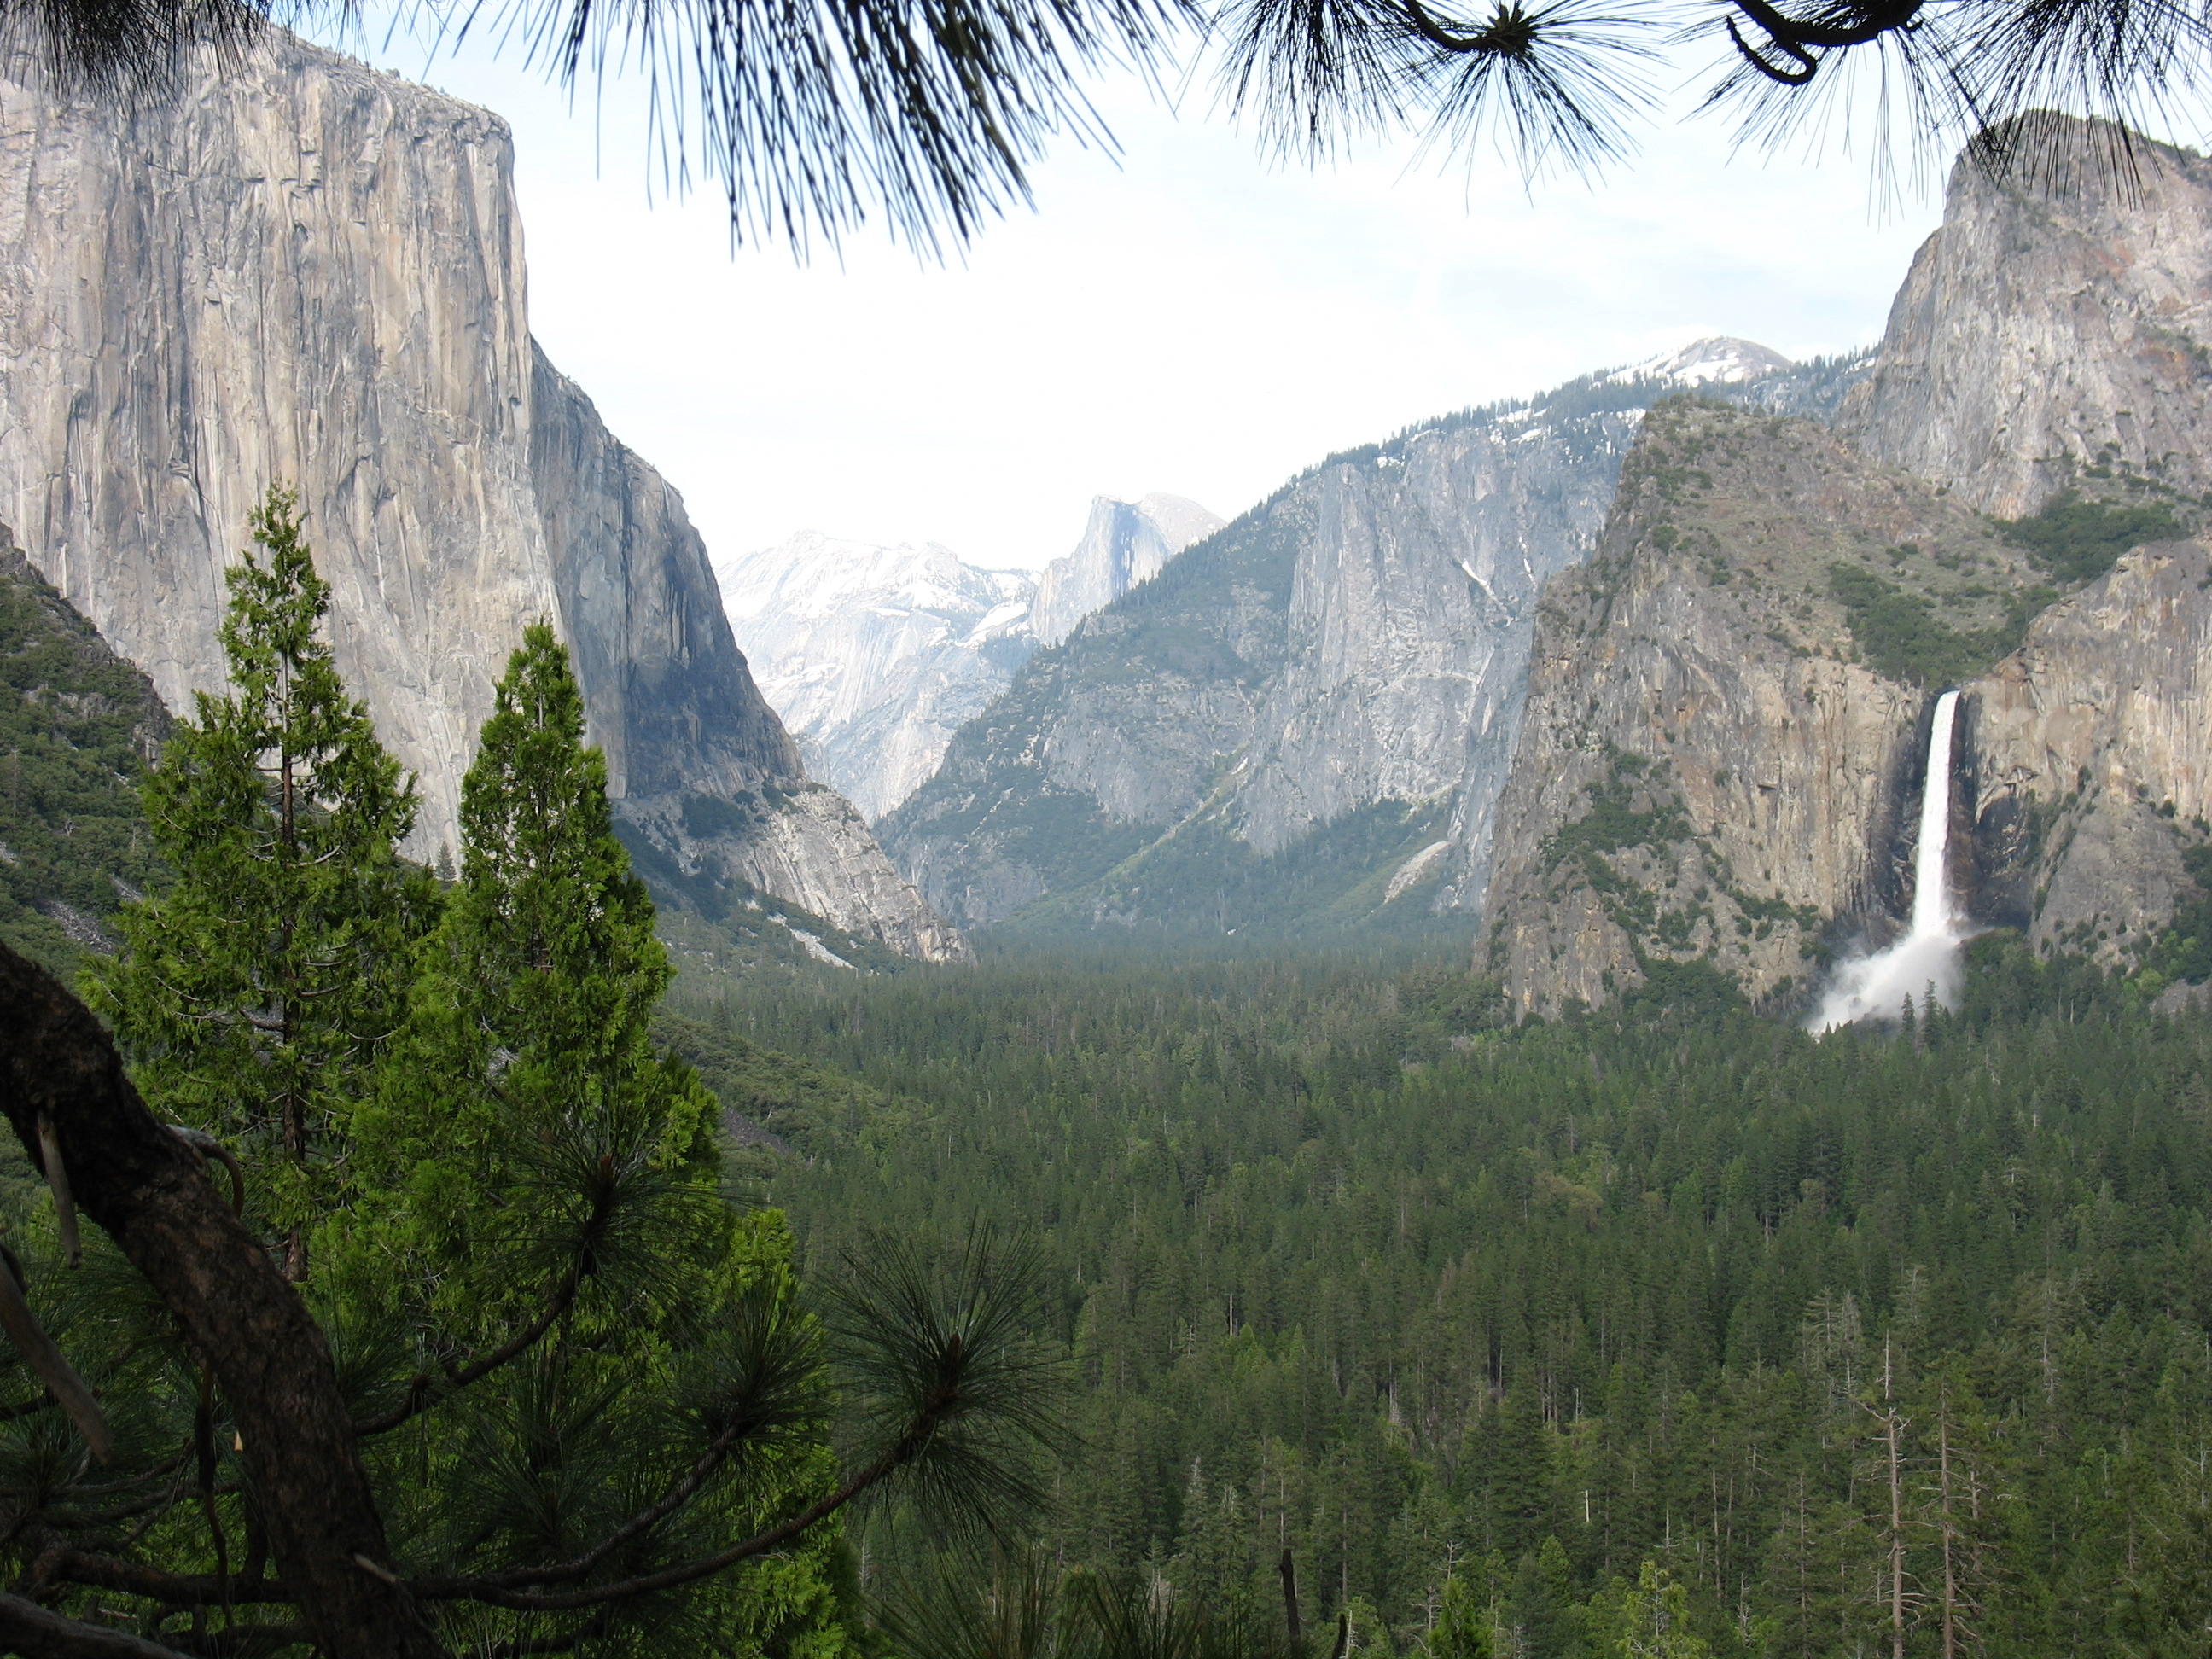 View of Yosemite Valley with waterfall